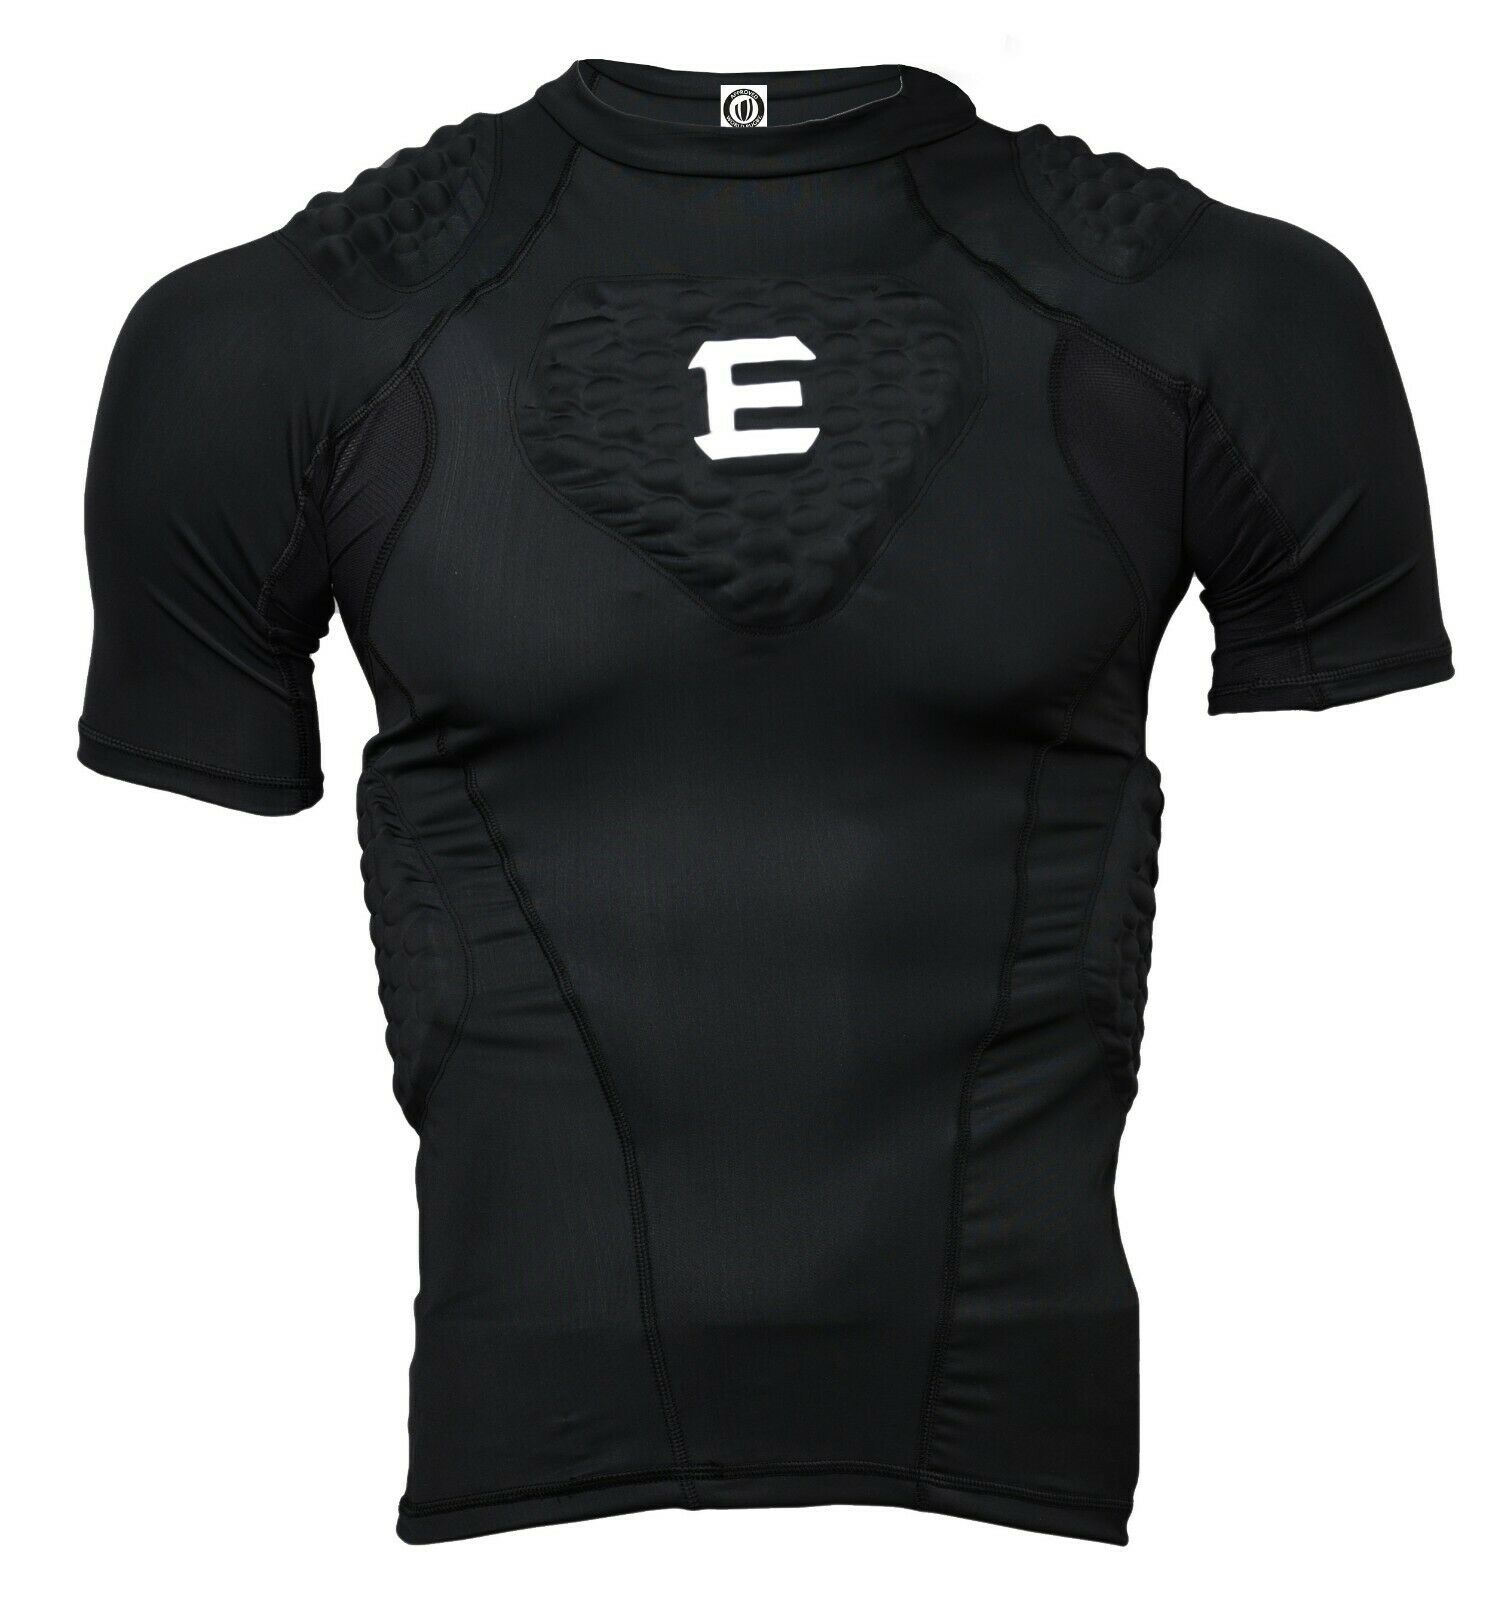 Padded - All Sports - Compression Shirt Cps14 Youth & Adult Sizes - By Elitetek